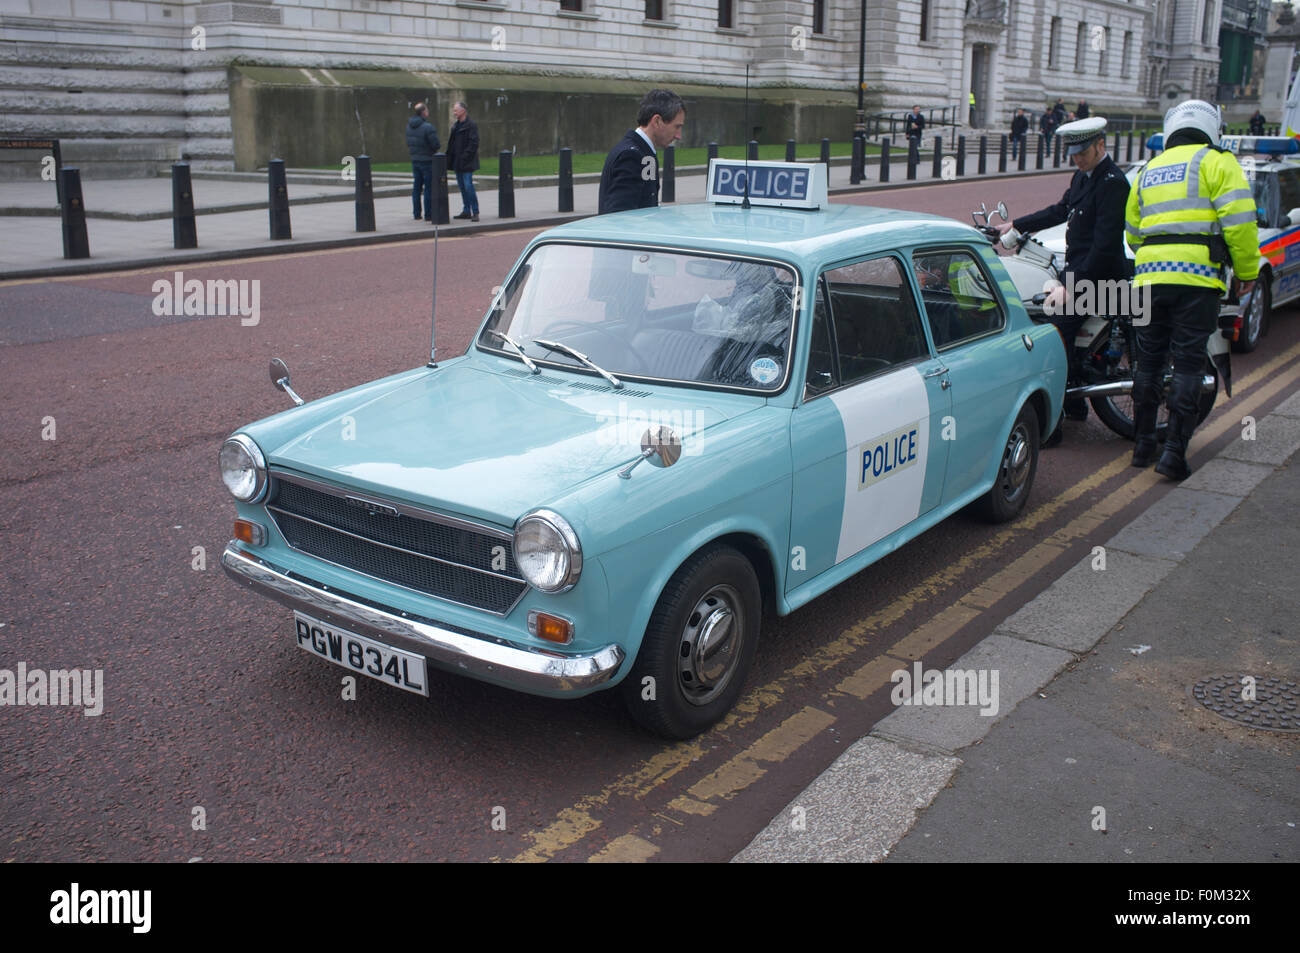 A police Austin 1100 part of the Metropolitan Police's historic vehicles collection Stock Photo